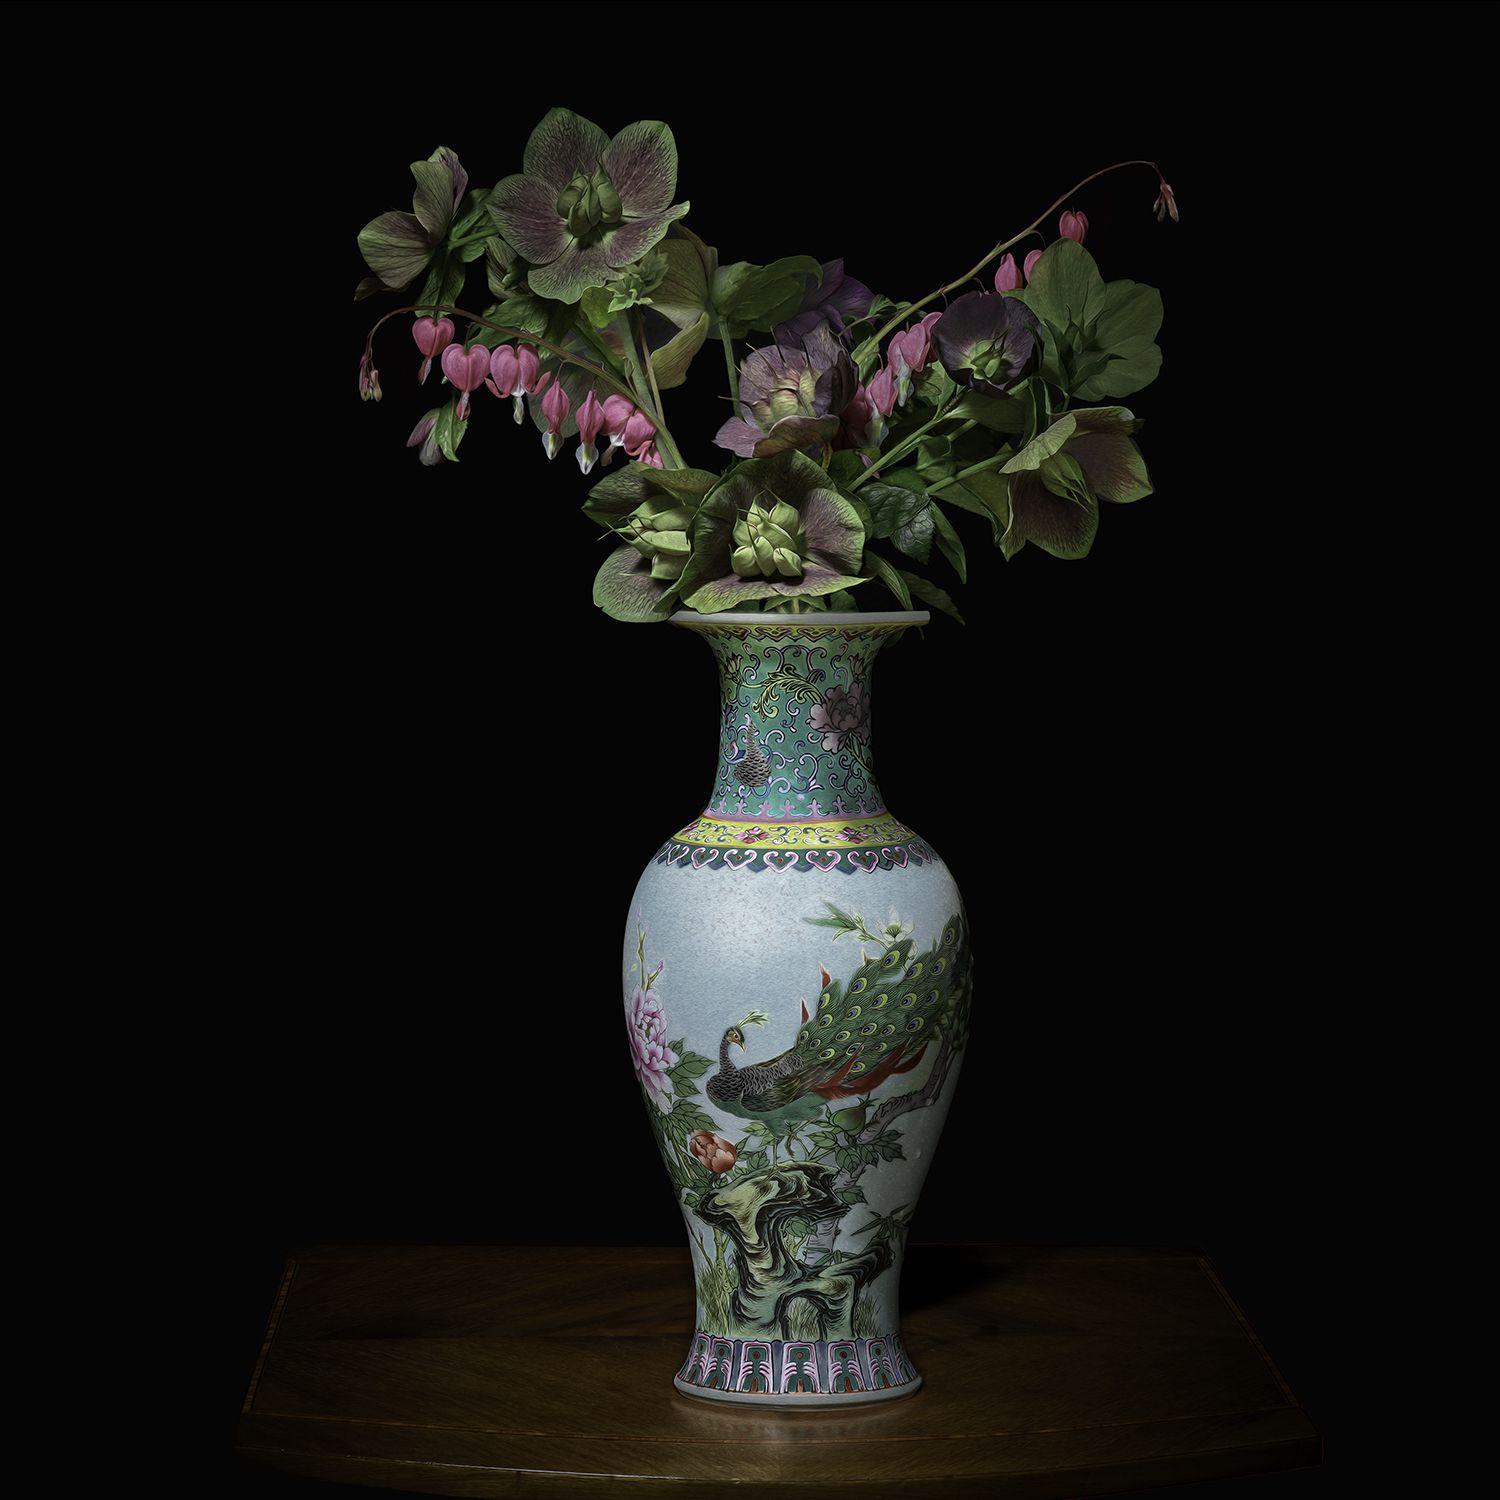 Hellebores and Bleeding Hearts in a Chinese Vessel - Photograph by T.M. Glass